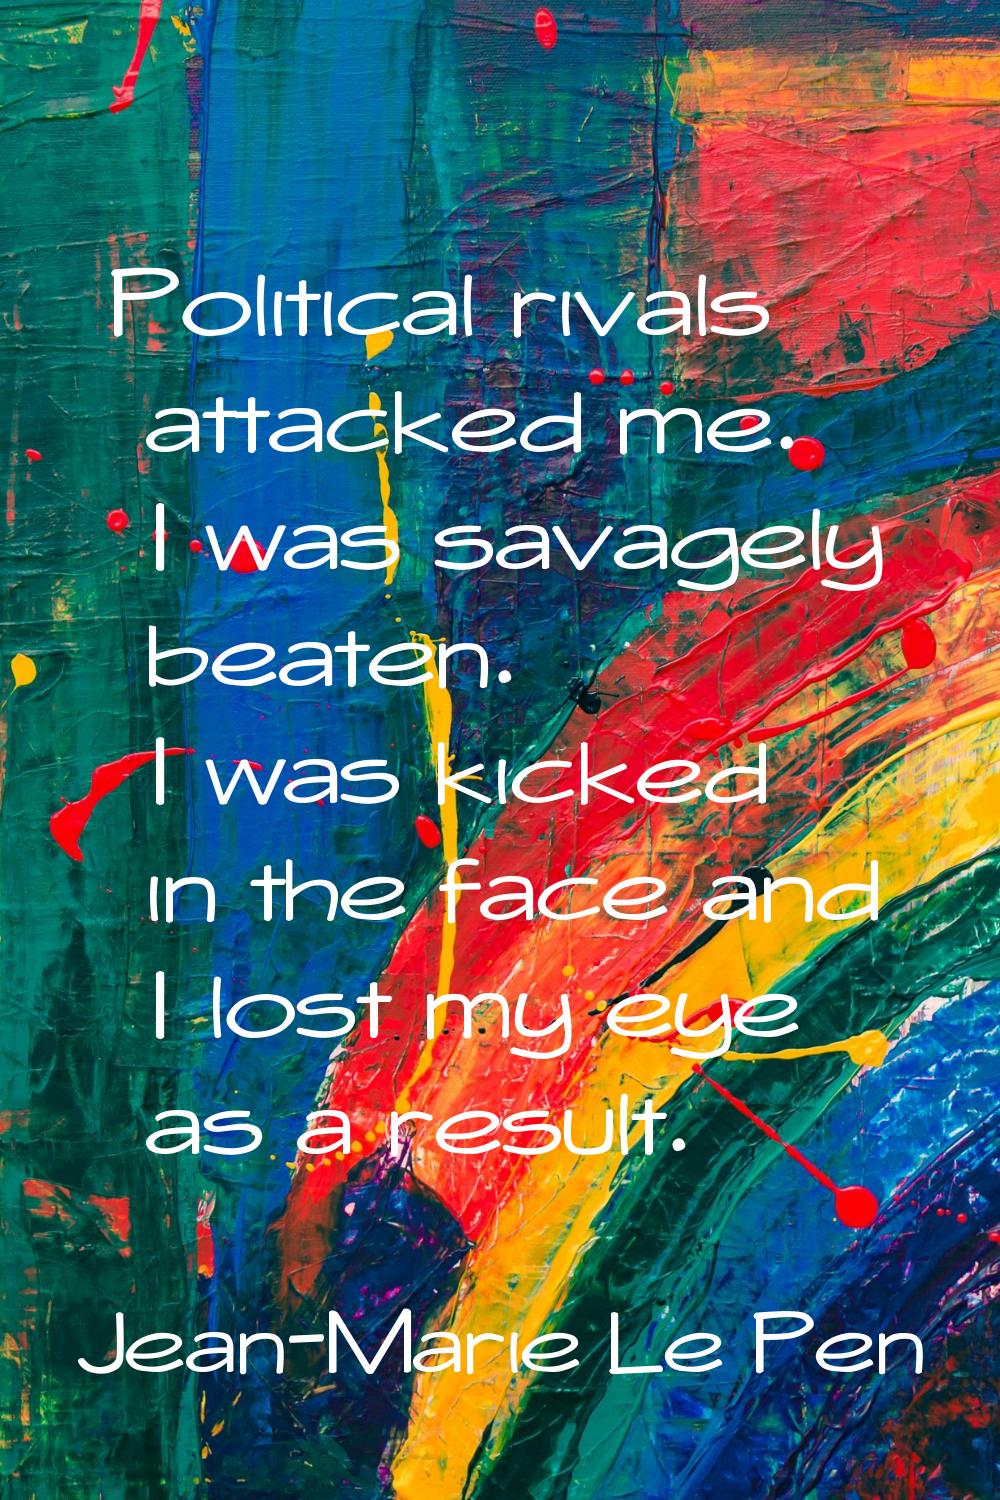 Political rivals attacked me. I was savagely beaten. I was kicked in the face and I lost my eye as 